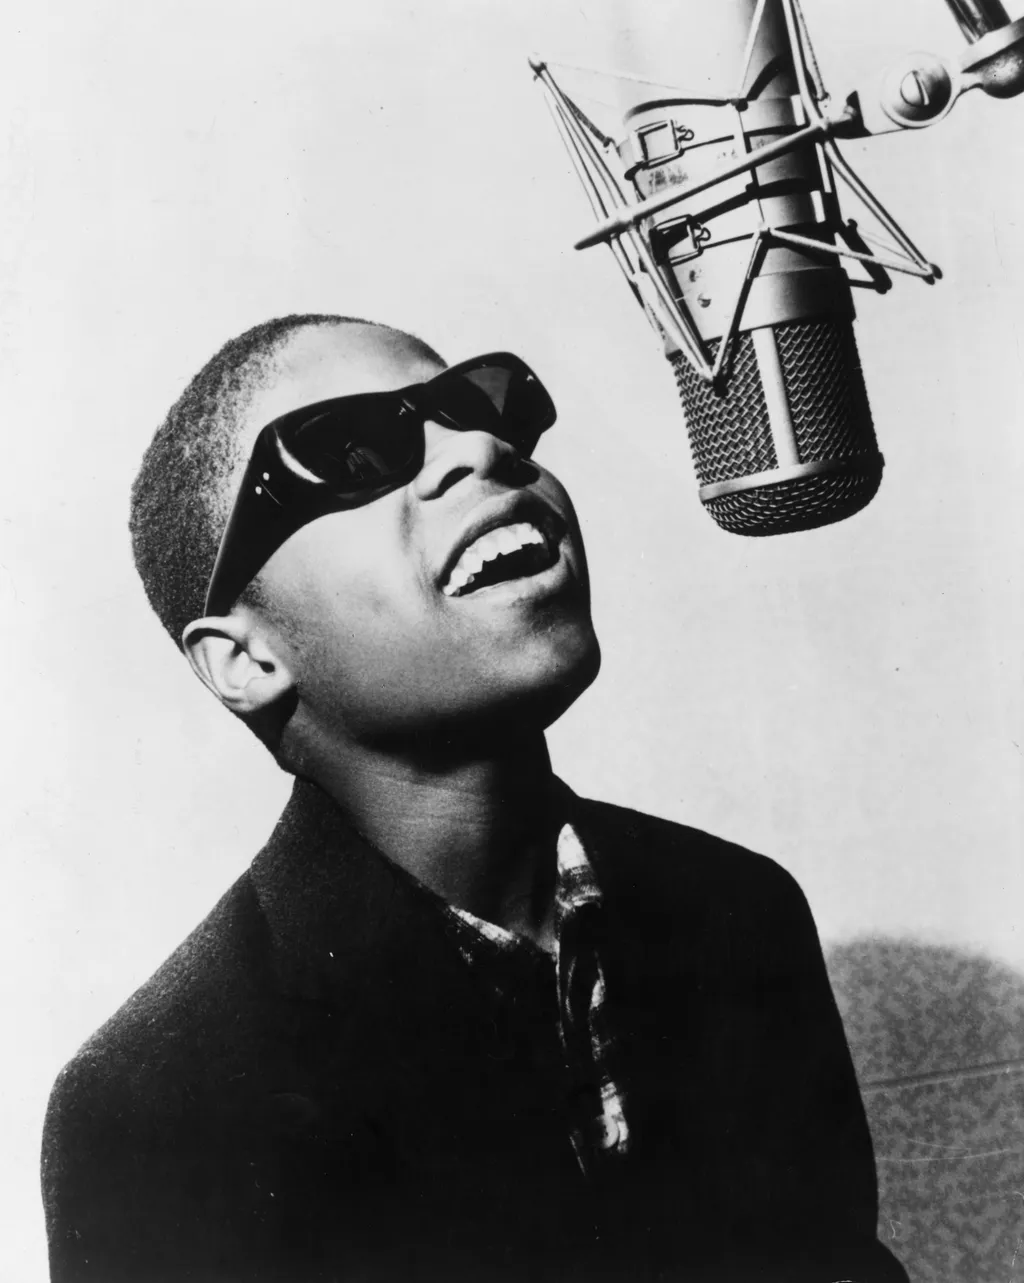 Stevie Wonder black & white;format portrait;male;disabled;microphone;Music;Songwriter;Soul;Pop;American Timeline;The African American Experience;Personality;American;P 85618 NO NEG;ES P/WONDER/STEVIE black & white format portrait male disabled microphone 